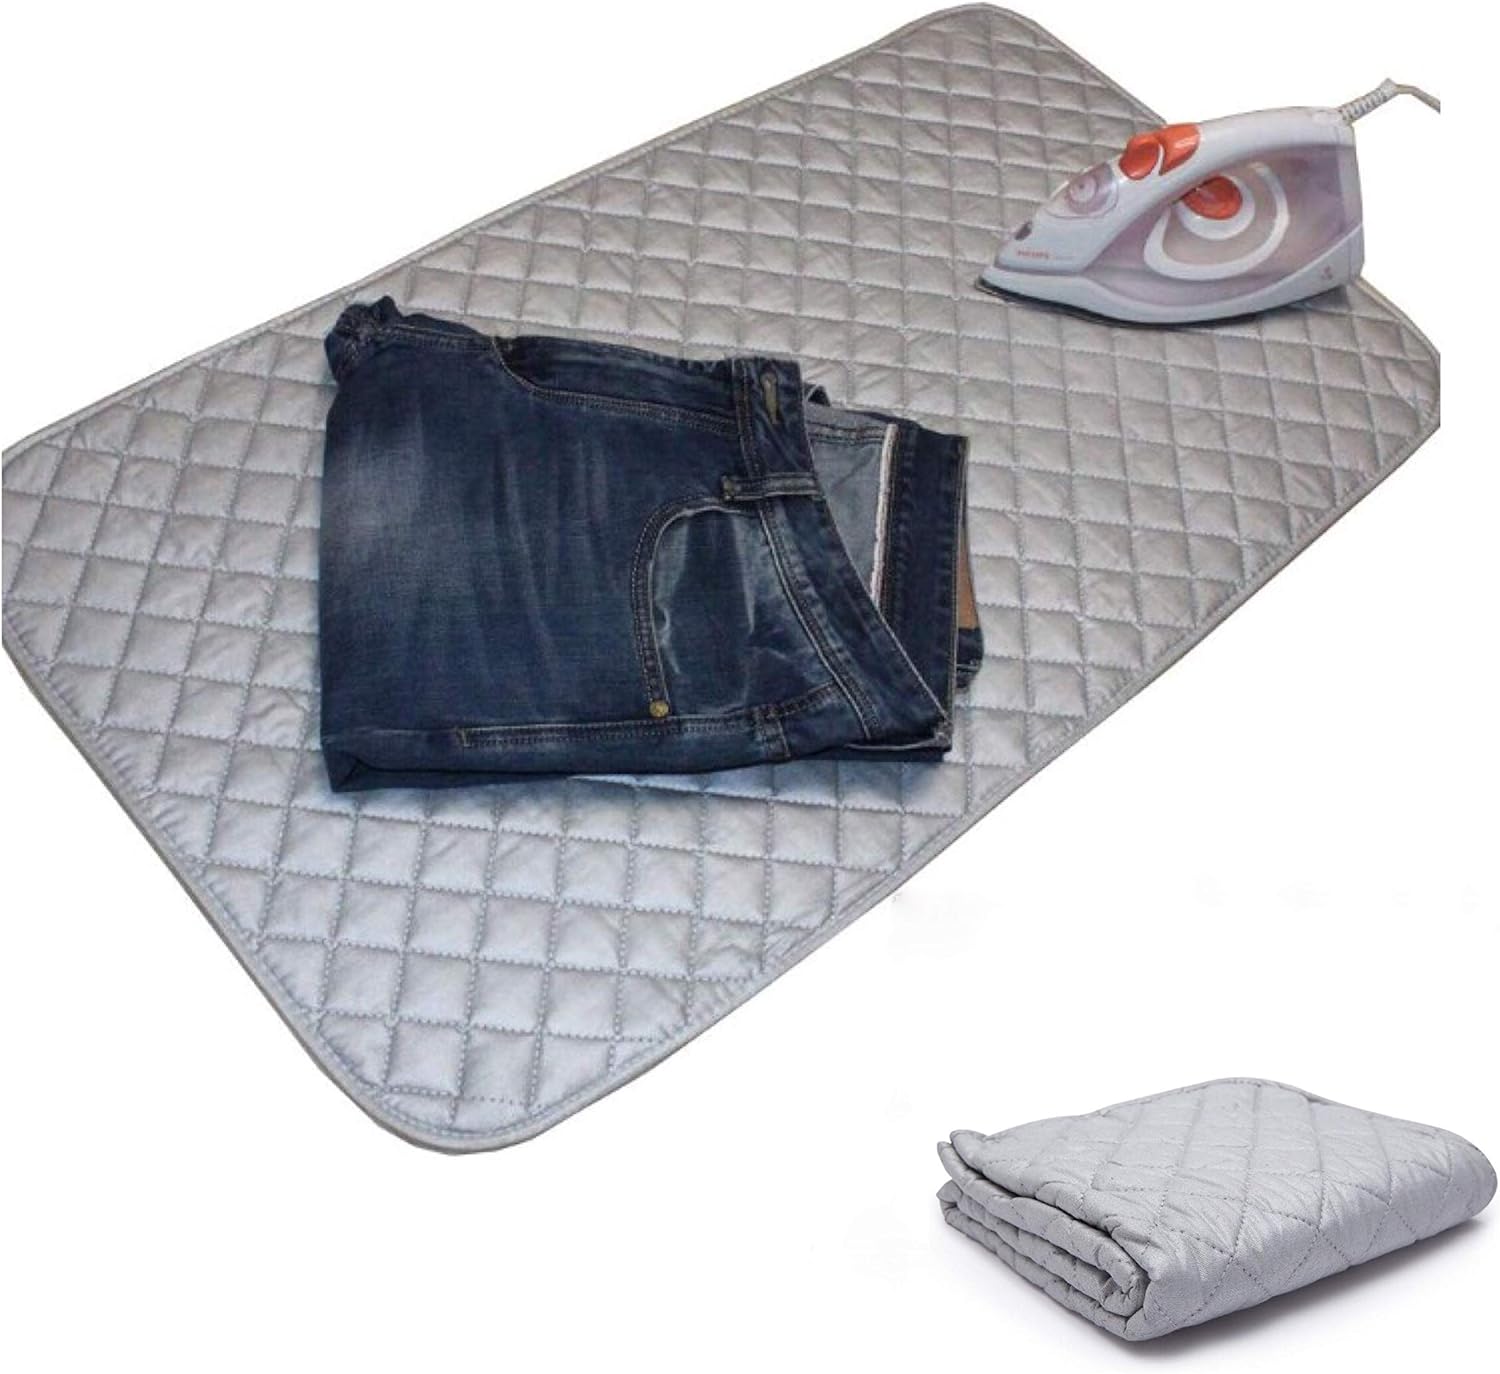 ADEPTNA Durable Anywhere Ironing Pad Mat Travel Ironing Blanket Cotton Ironing Mat Special Titanium Coating Reflects the Heat-No More Bulky Ironing Boards-Perfect for traveling or Small Apartments